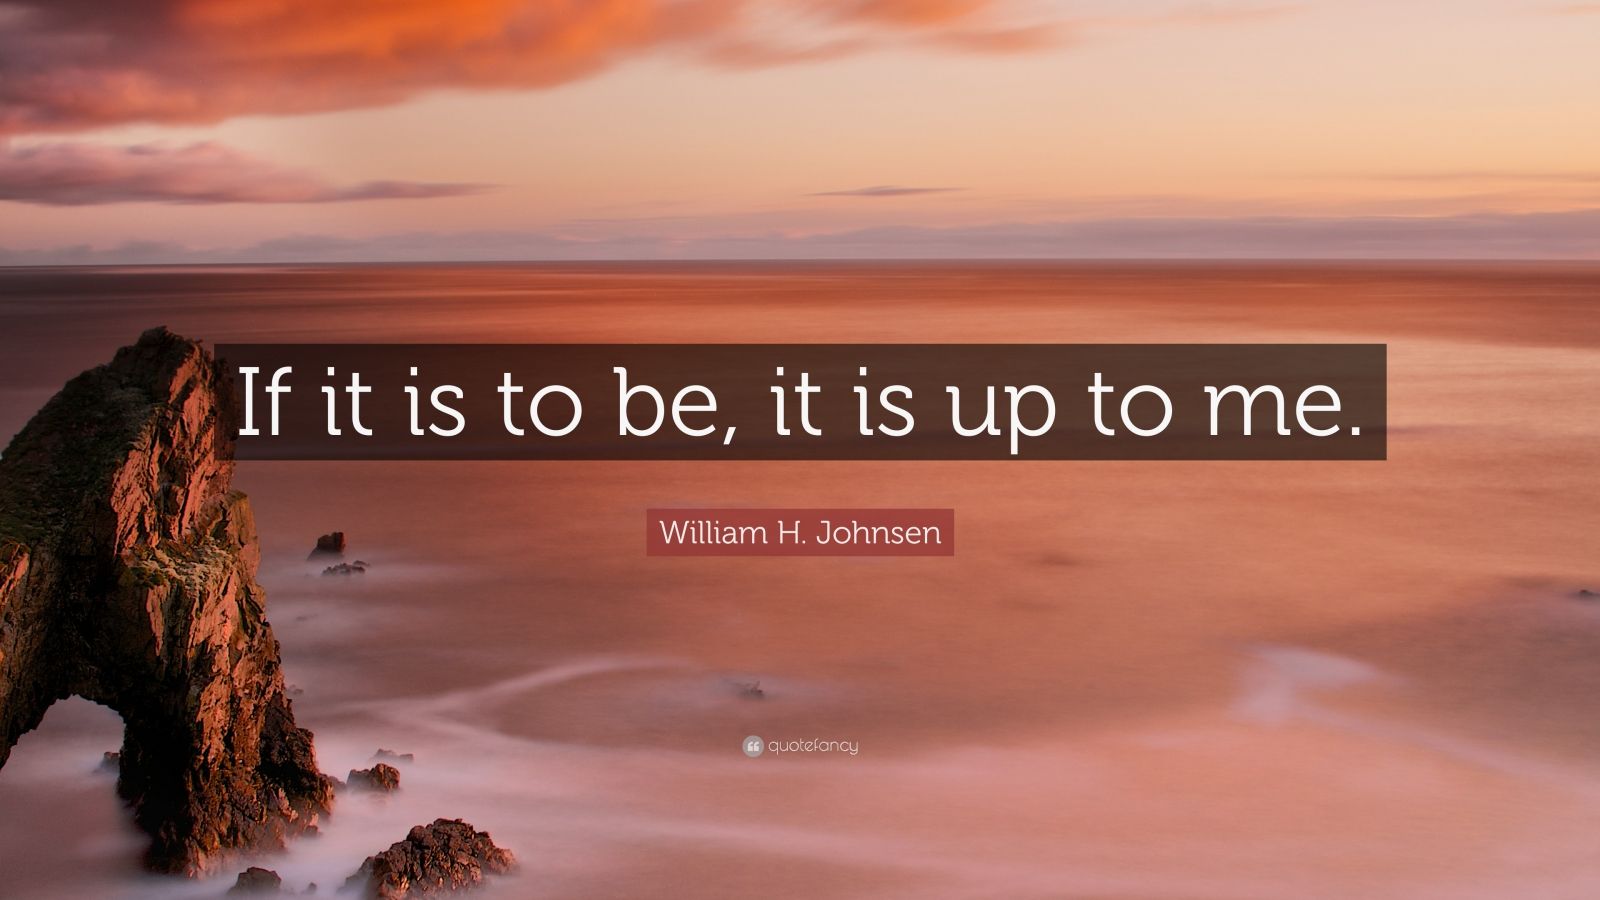 William H. Johnsen Quote: “If it is to be, it is up to me.” (29